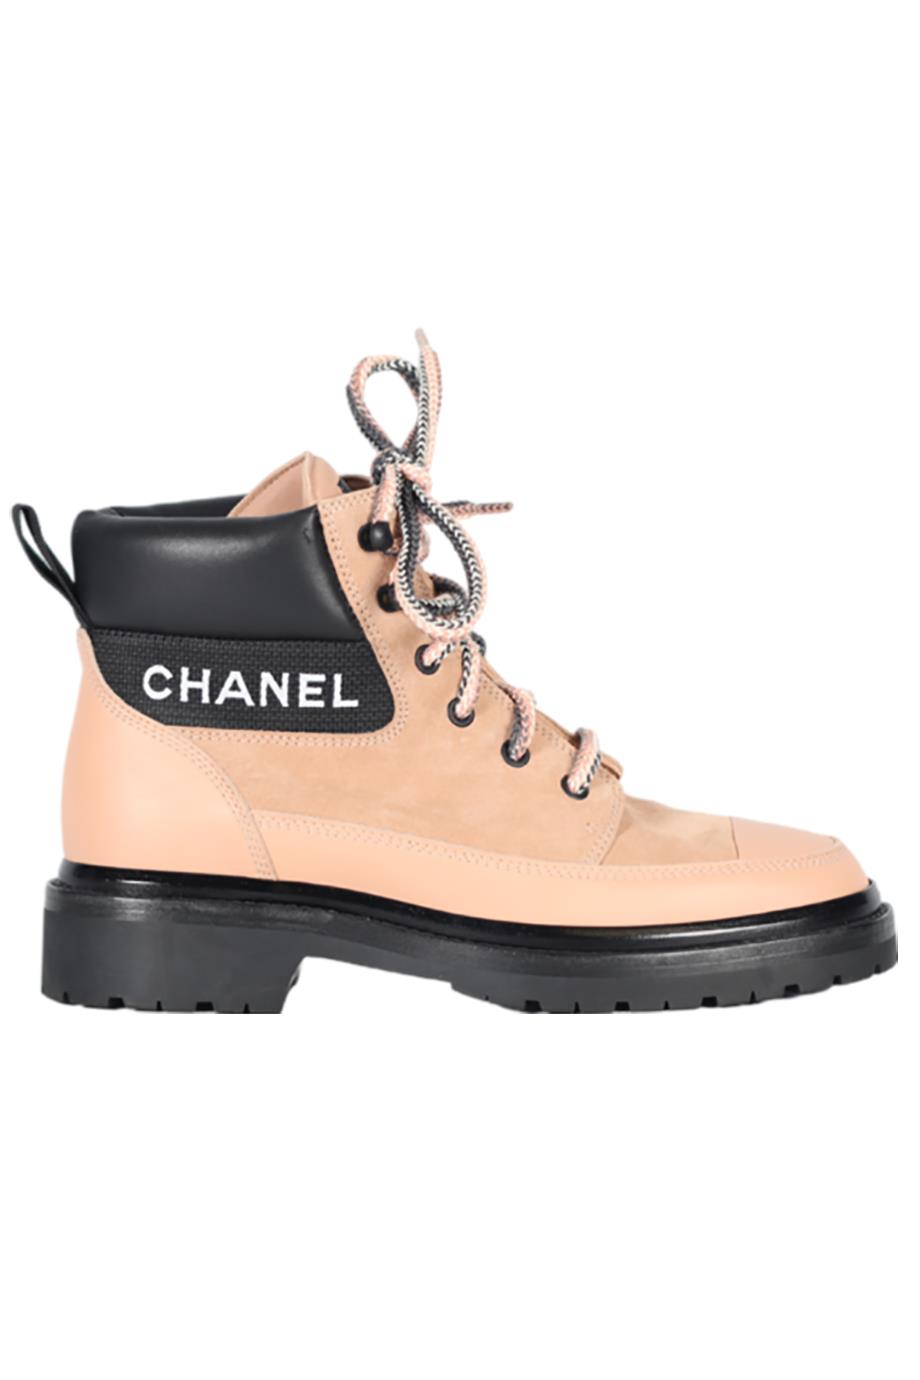 CHANEL 2020 SUEDE AND LEATHER ANKLE BOOTS EU 38 UK 5 US 8